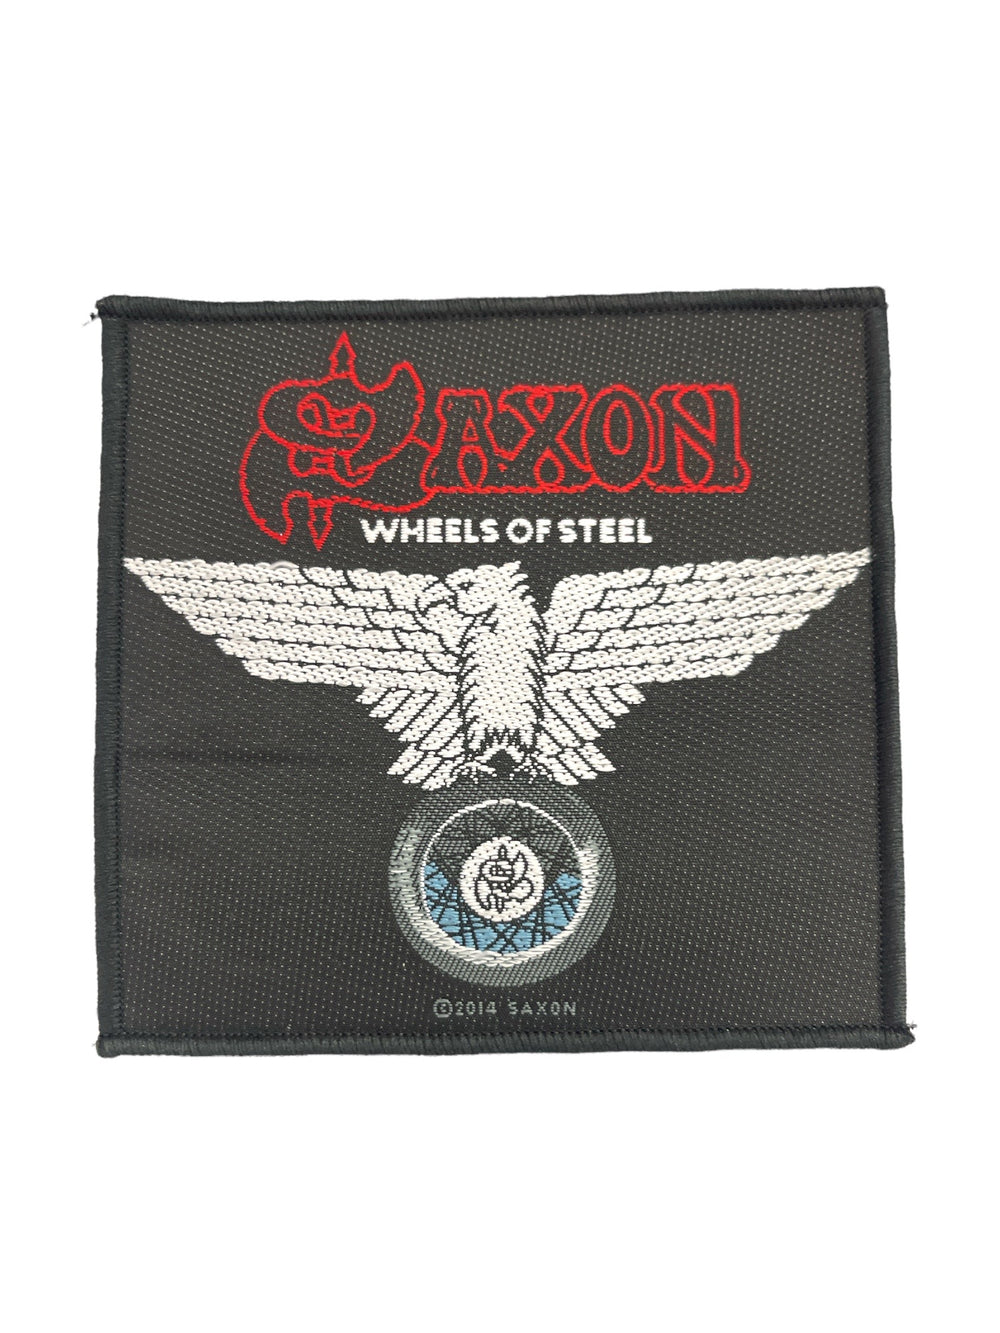 Saxon Standard Patch: Wheels of Steel Official Woven Patch Brand New